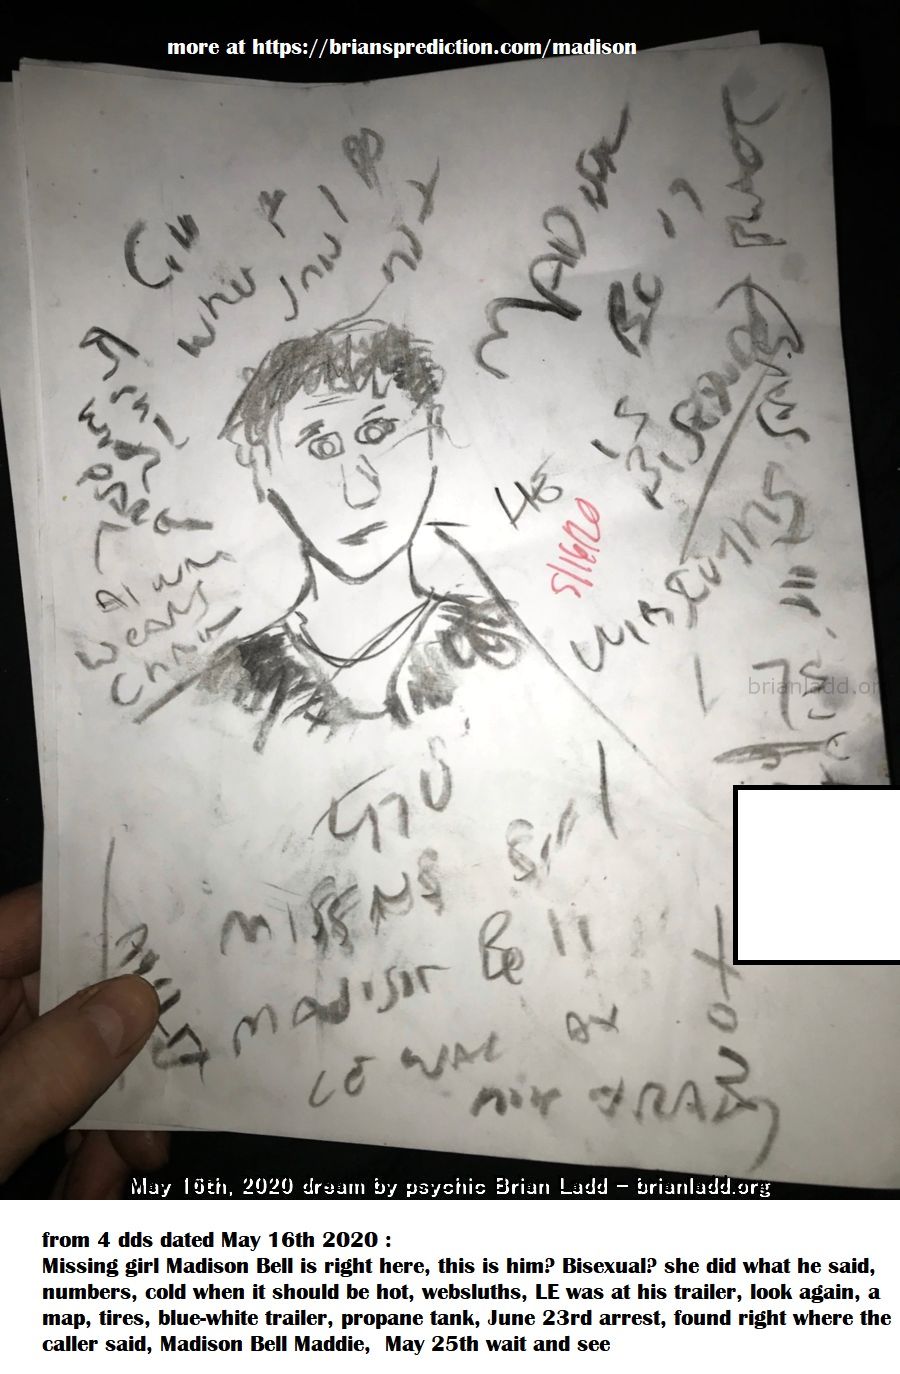 16 May 2020 2 - From 4 Dds Dated May 16th 2020 :  Missing Girl Madison Bell Is Right Here, This Is Him? Bis...
From 4 Dds Dated May 16th 2020 :  Missing Girl Madison Bell Is Right Here, This Is Him? Bisexual? She Did What He Said, Numbers, Cold When It Should Be Hot, Websluths, Le Was At His Trailer, Look Again, A Map, Tires, Blue-White Trailer, Propane Tank, June 23rd Arrest, Found Right Where The Caller Said, Madison Bell Maddie,  May 25th Wait And See  More At   https://briansprediction.com/Madison
